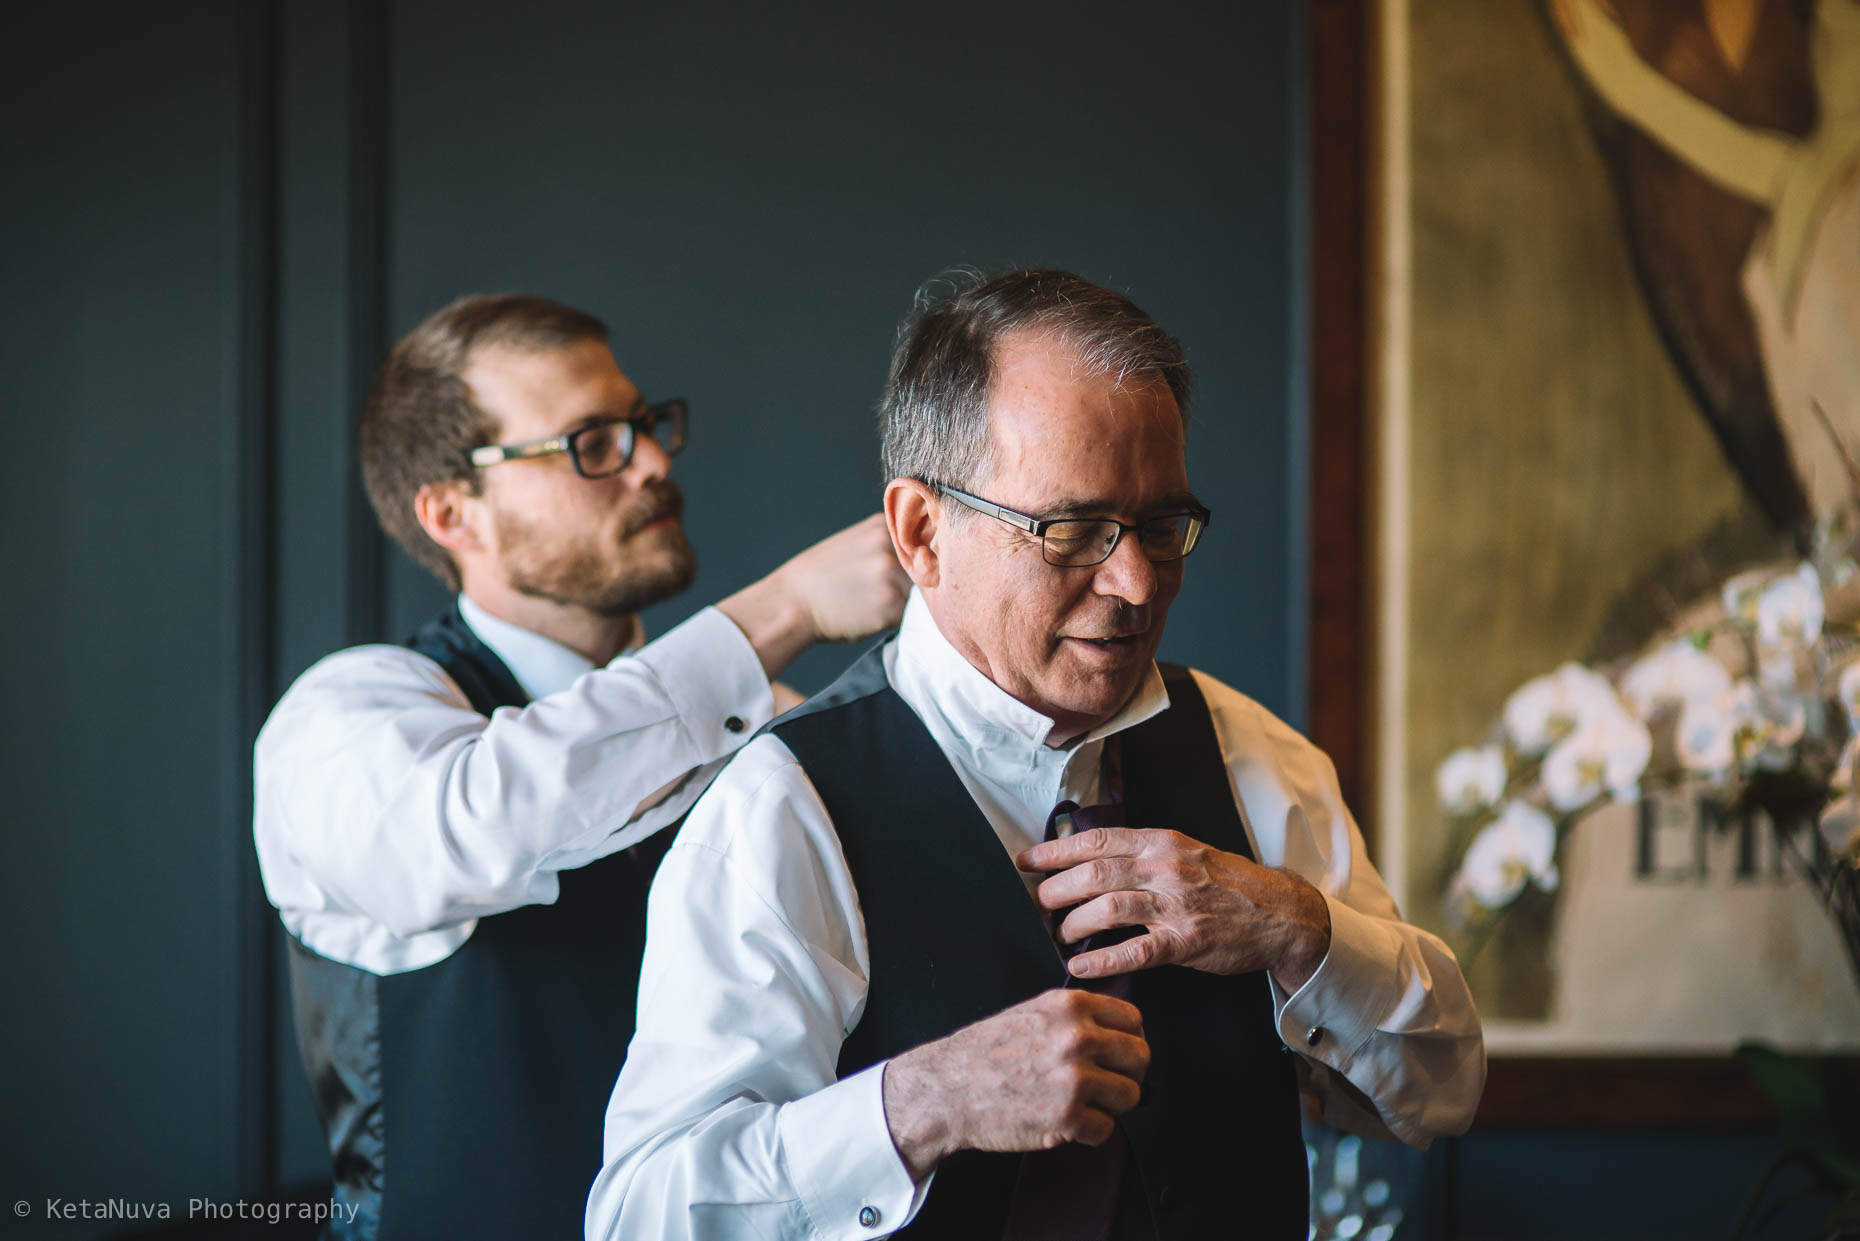 Father of the bride getting ready for his daughter's big day!